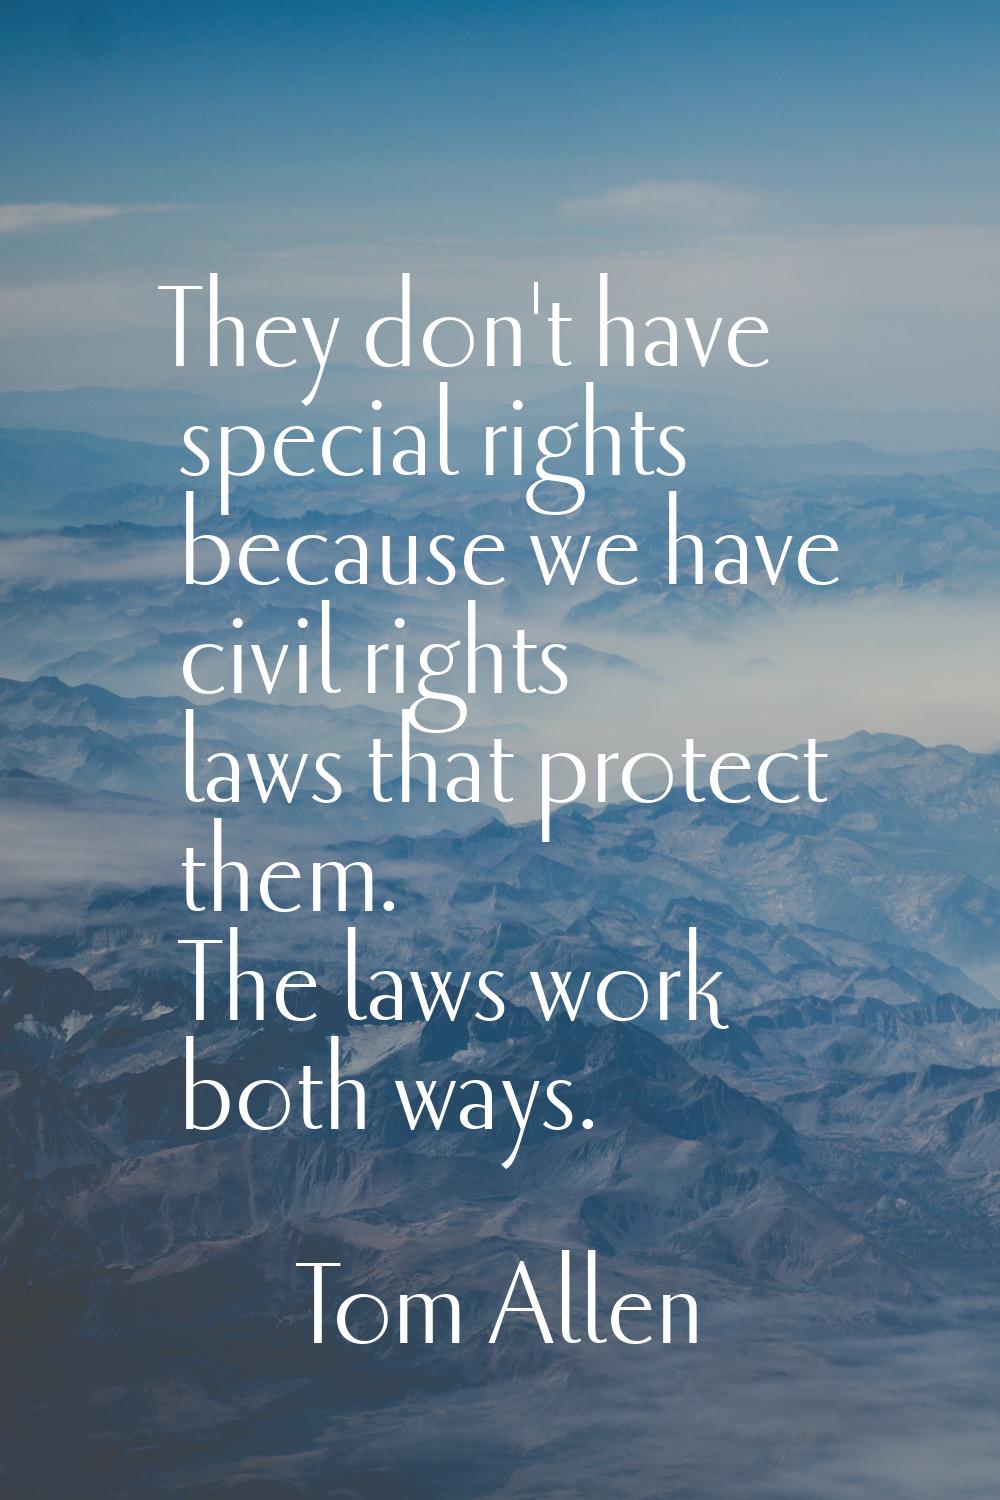 They don't have special rights because we have civil rights laws that protect them. The laws work b